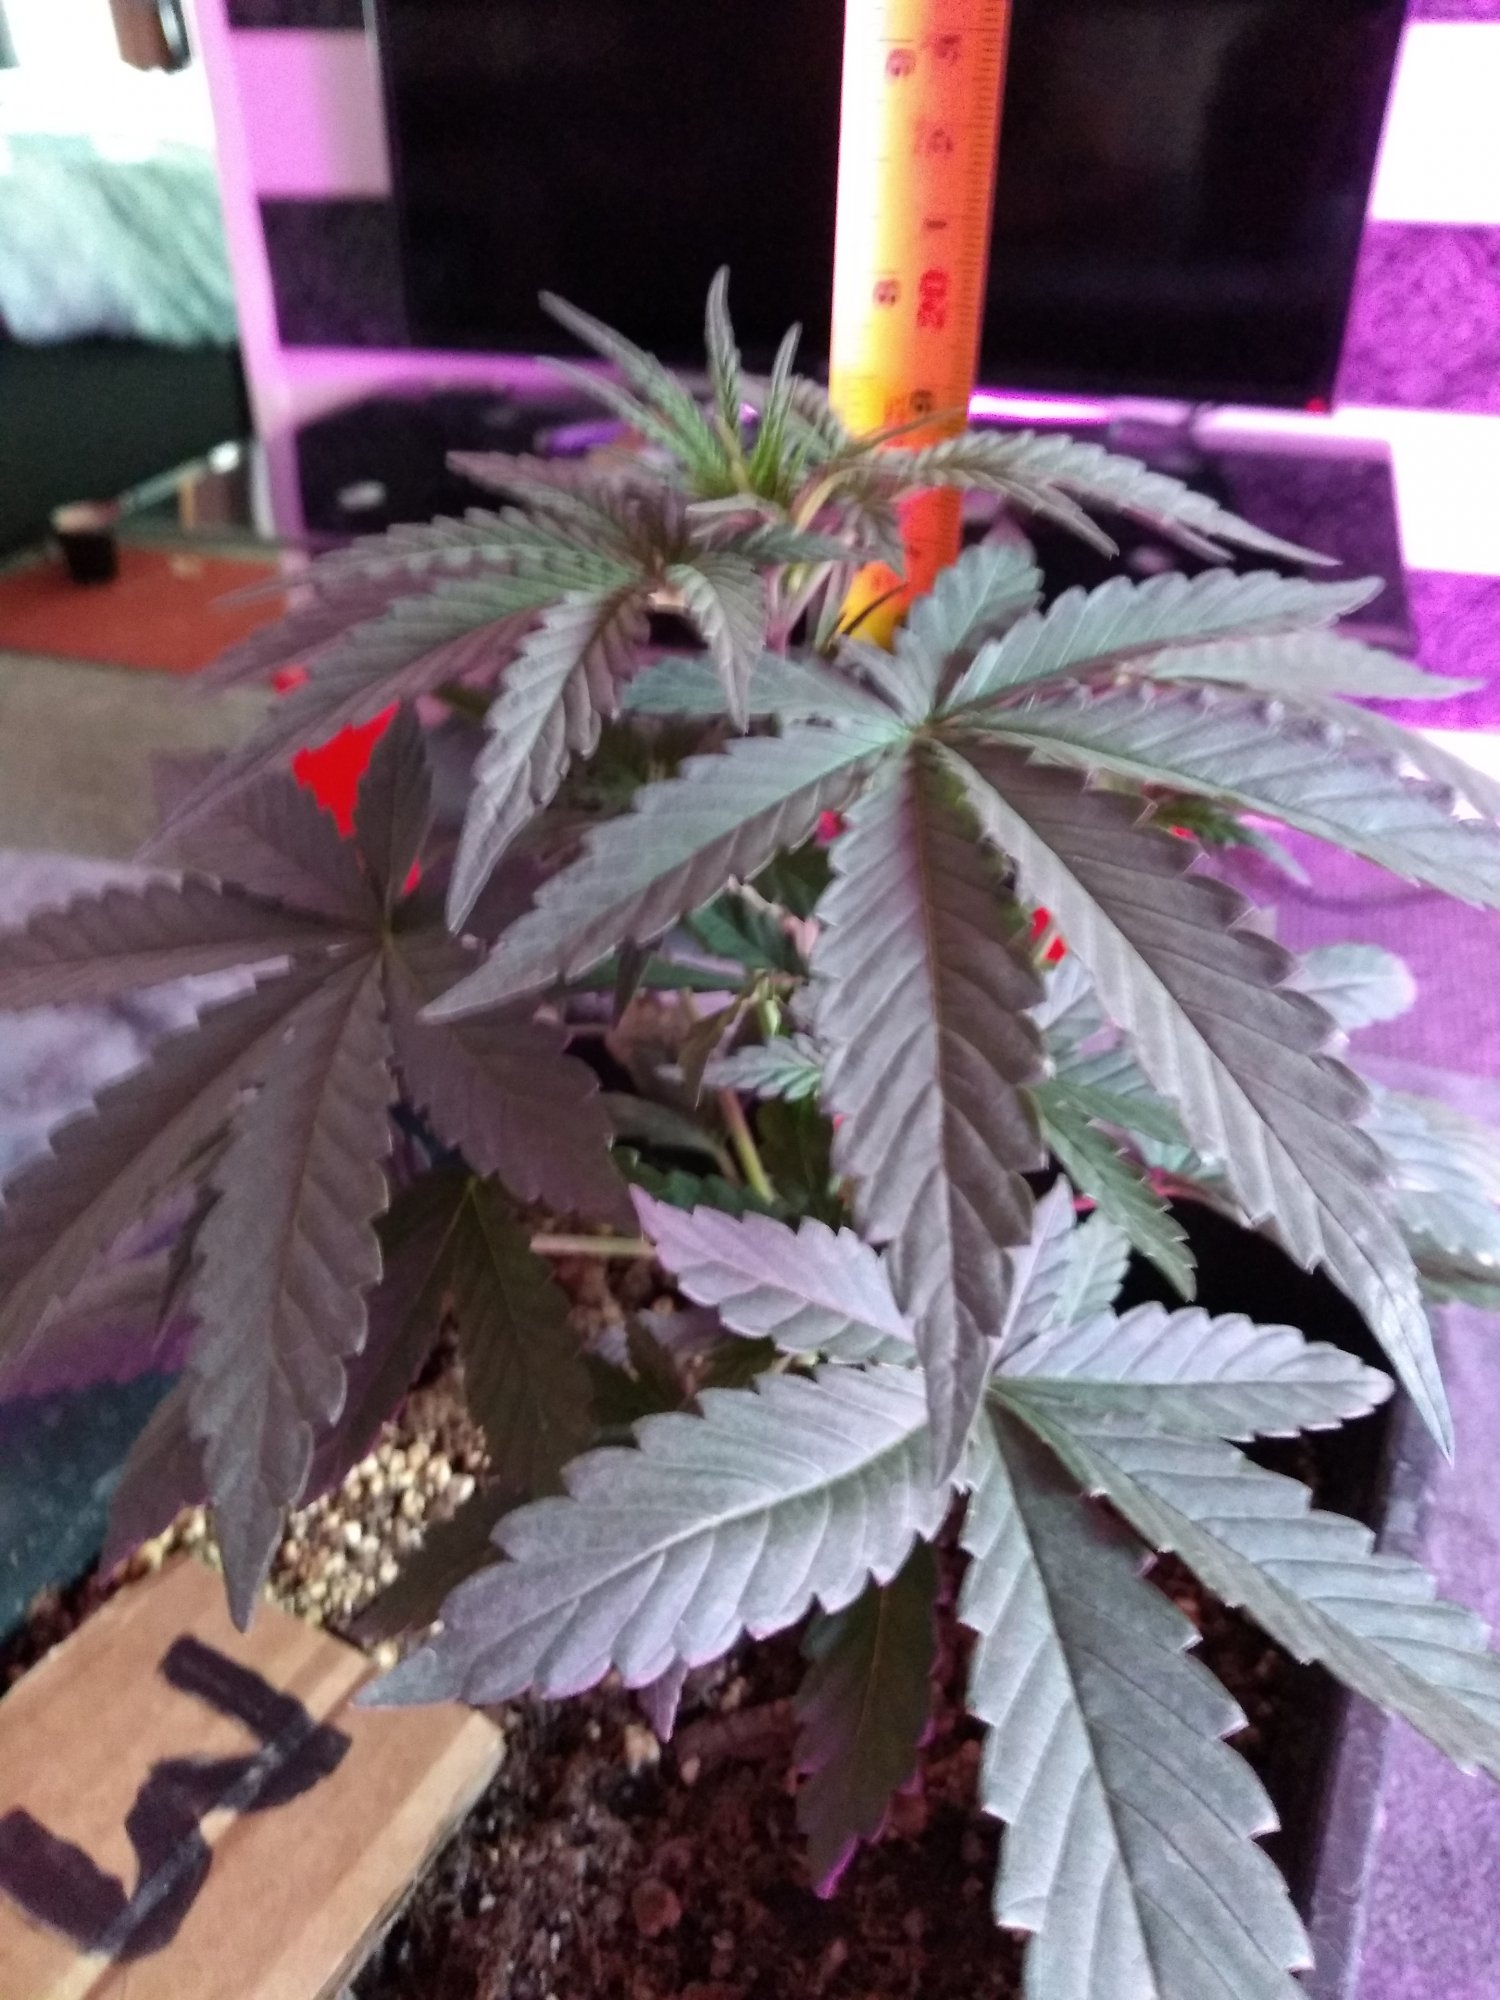 New grower   mistakes have been made 4